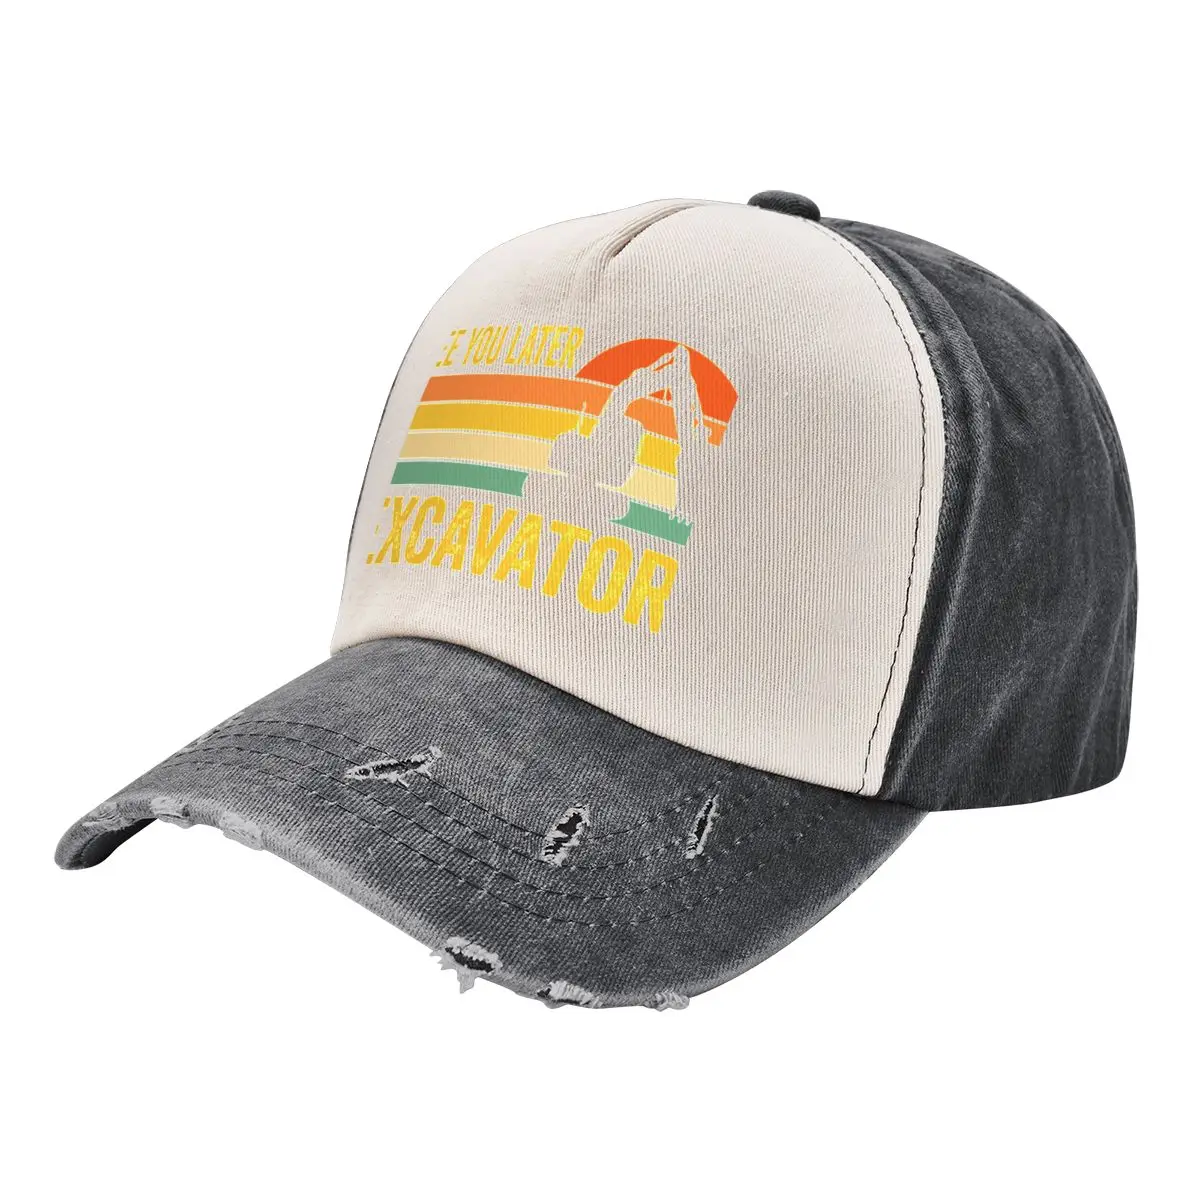 

See You Later Excavator Baseball Cap Beach Outing derby hat Men Caps Women's